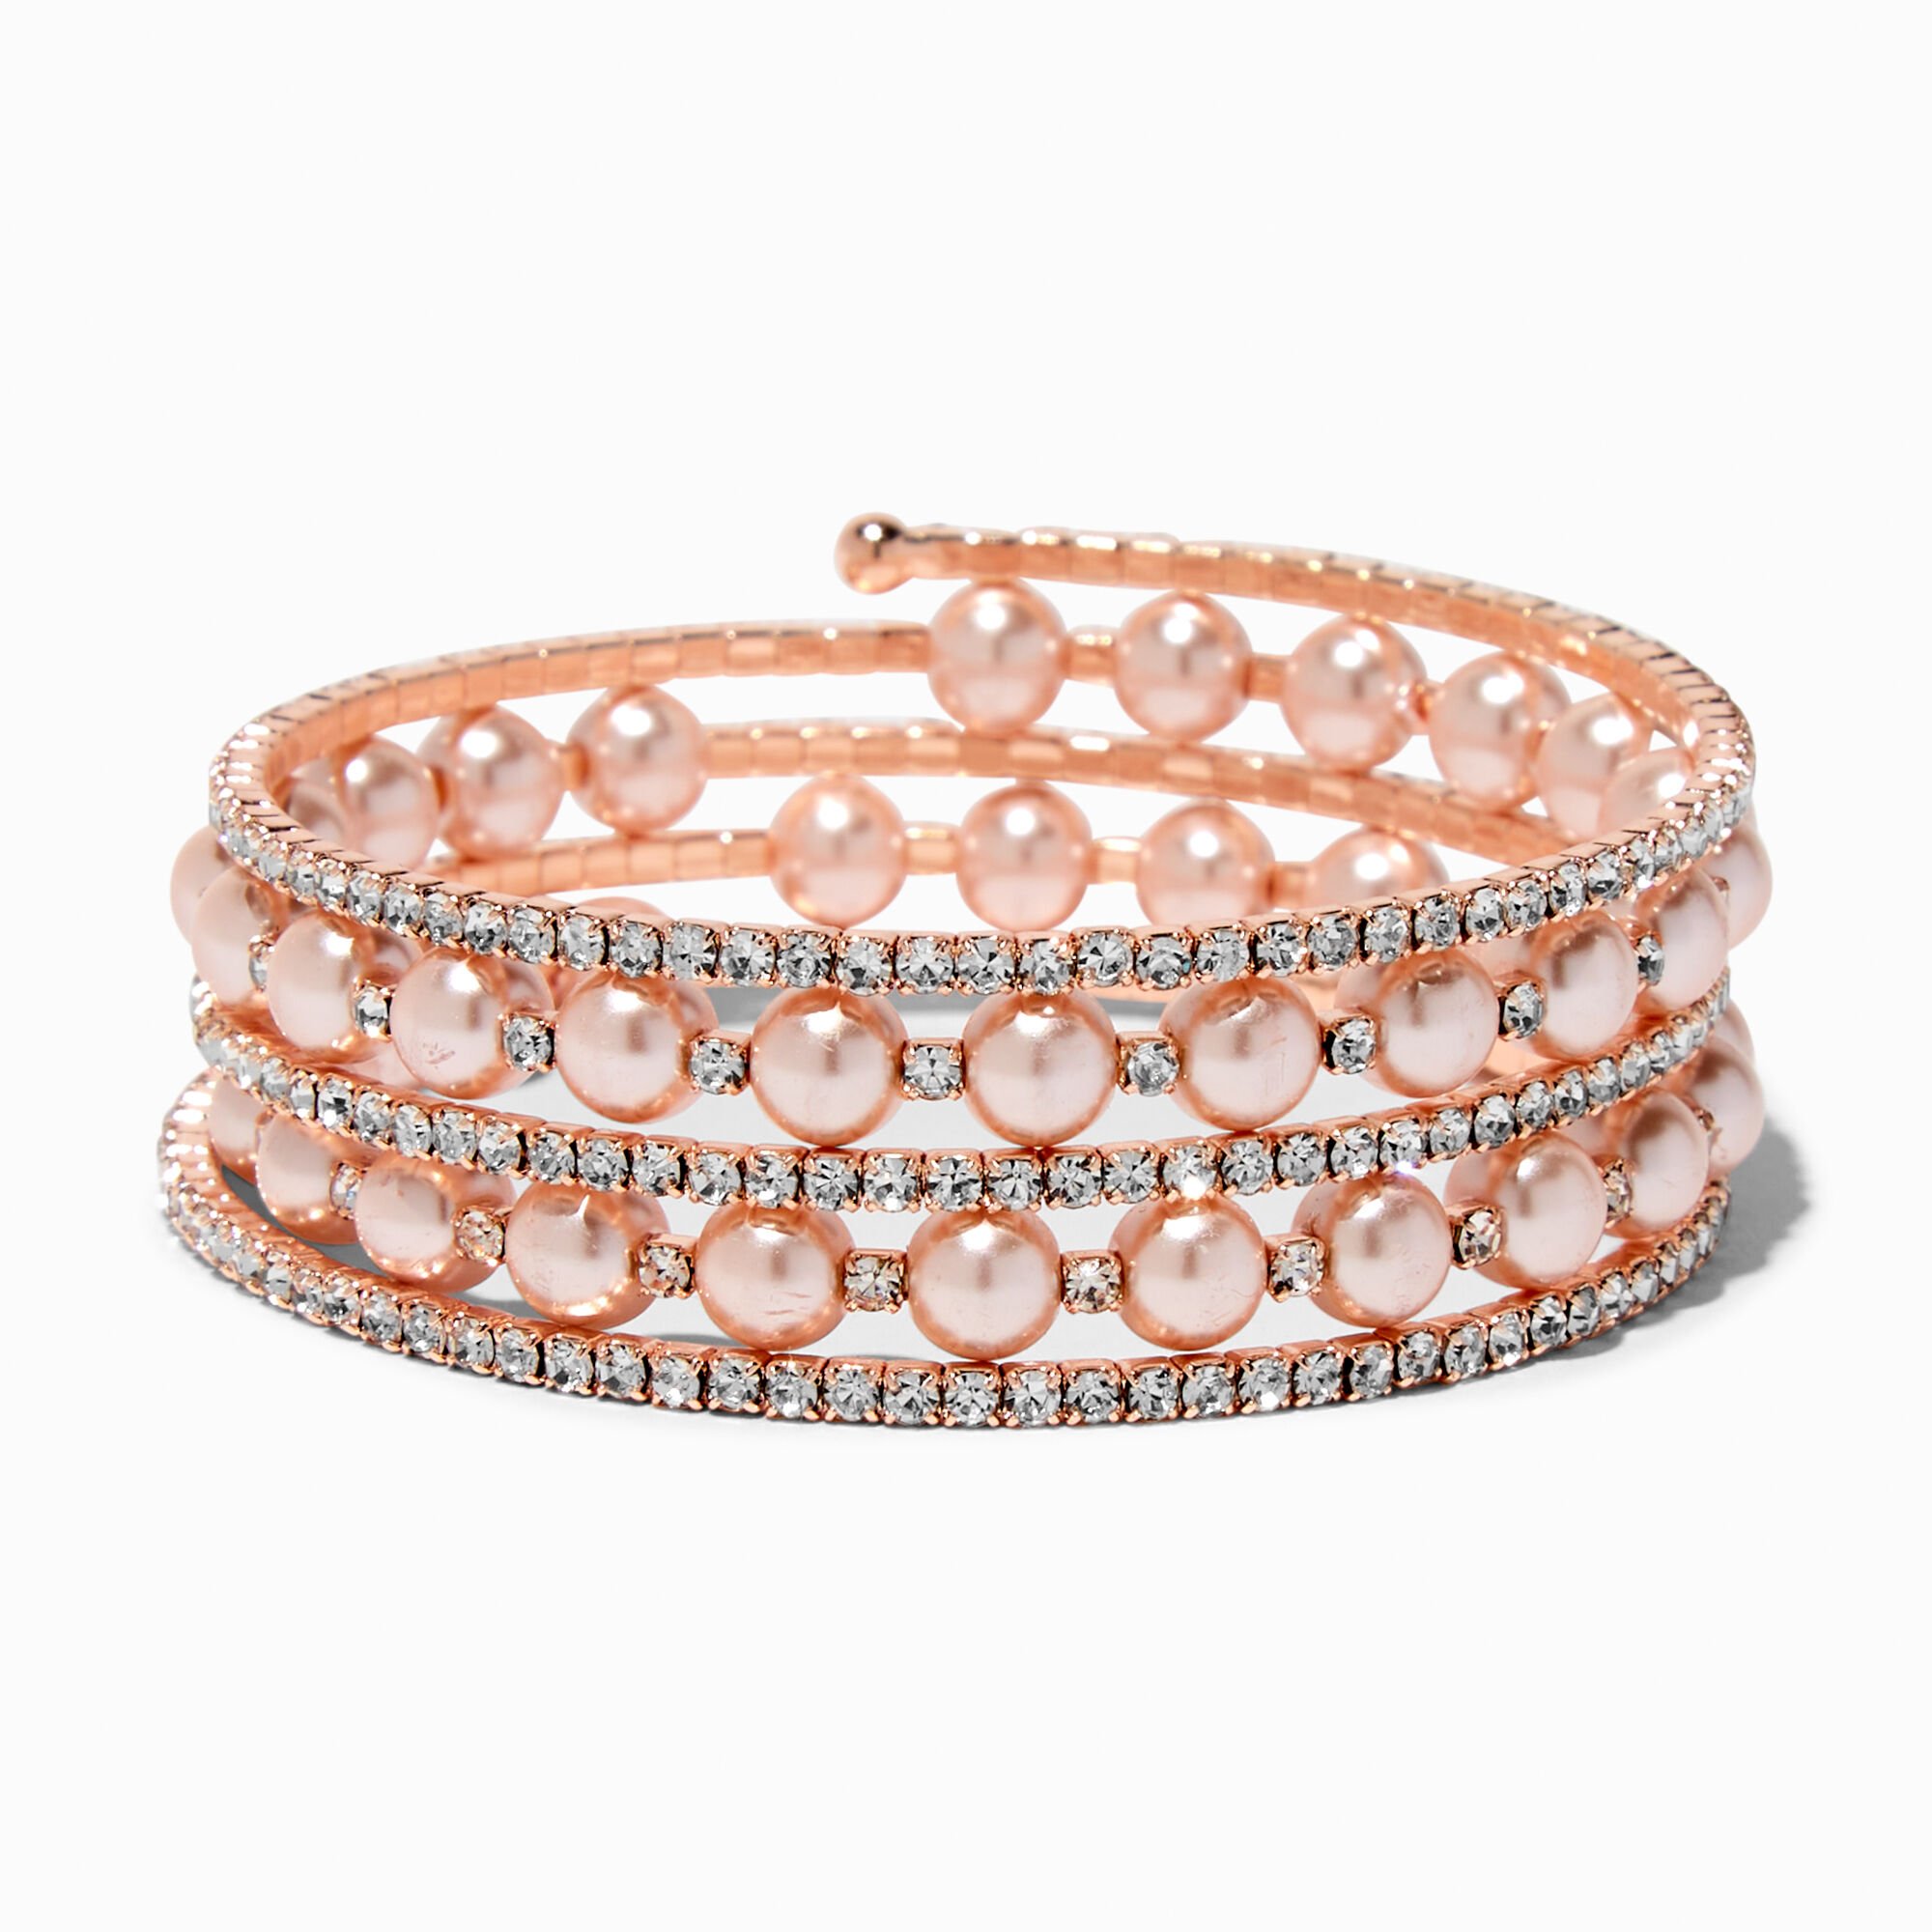 Neon Pink Leather Wrap Bracelet with Silver Charm | Nalu Beads